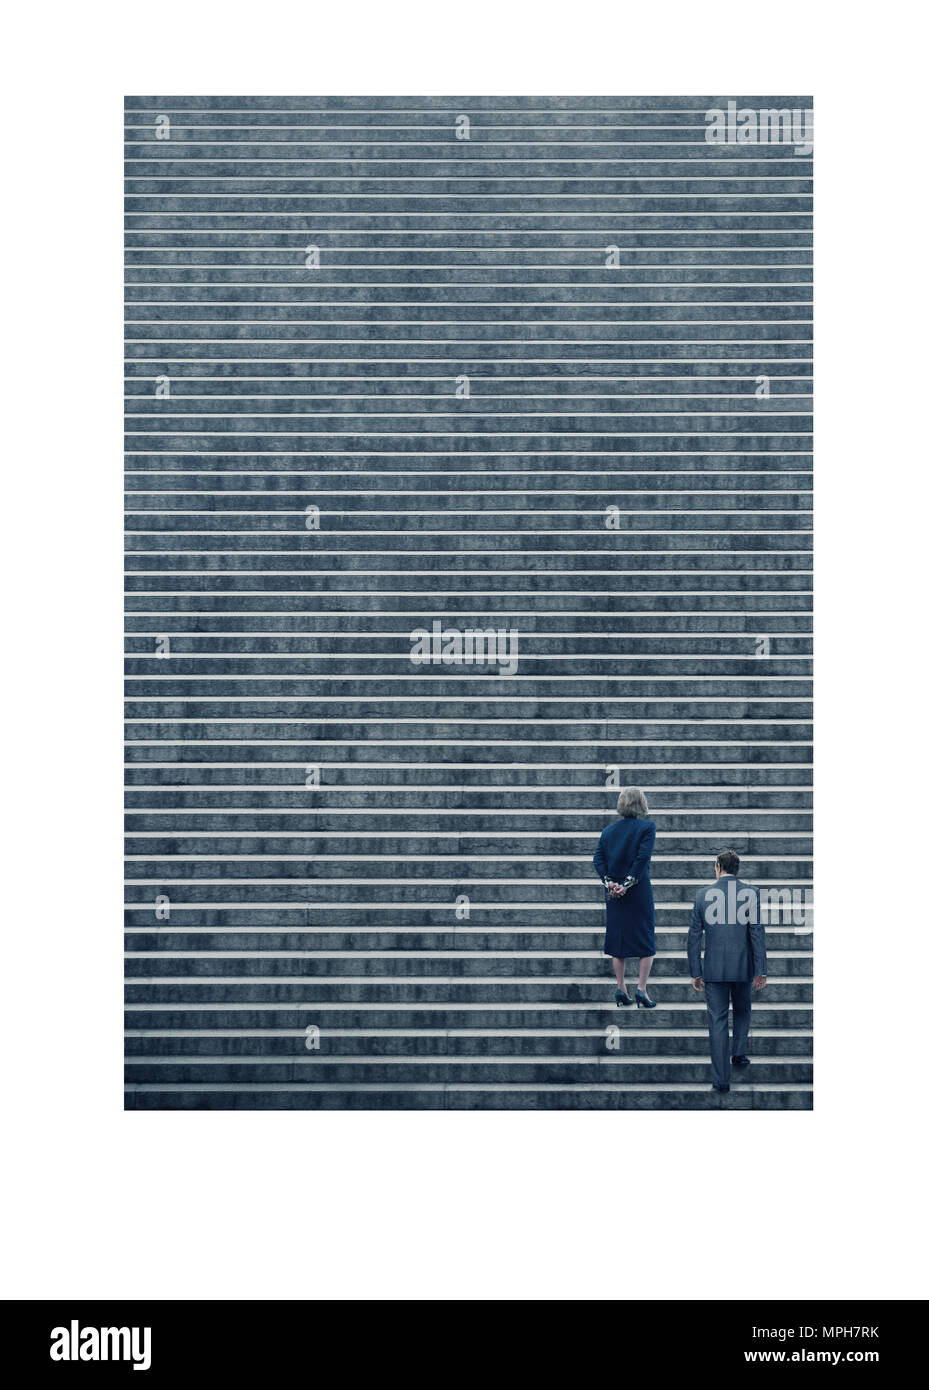 RELEASE DATE: January 12, 2018 TITLE: The Post STUDIO: Twentieth Century Fox DIRECTOR: Steven Spielberg PLOT: A cover-up that spanned four U.S. Presidents pushed the country's first female newspaper publisher and a hard-driving editor to join an unprecedented battle between journalist and government. STARRING: TOM HANKS as Ben Bradlee, MERYL STREEP as Kay Graham. (Credit Image: © Twentieth Century Fox/Entertainment Pictures) Stock Photo